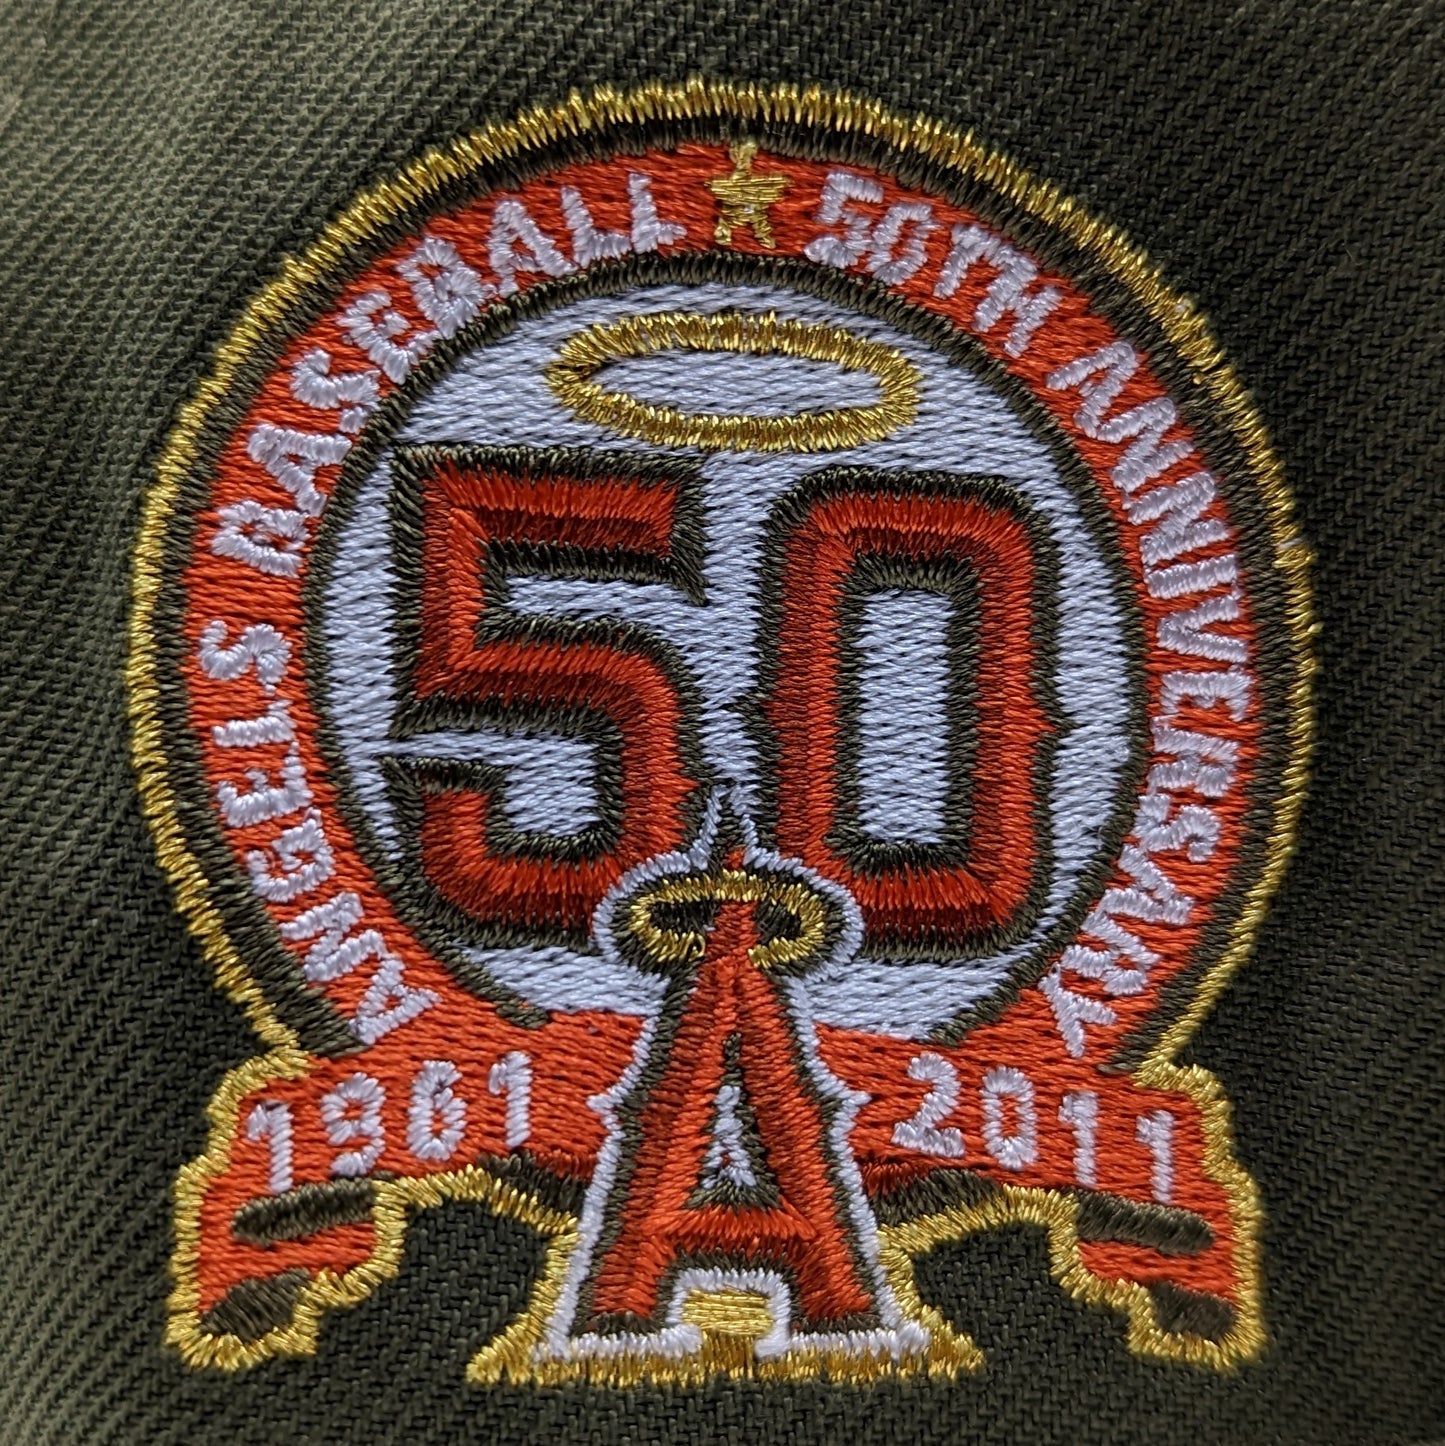 New Era 59Fifty Anaheim Angels 50th Anniversary Patch Fitted Hat